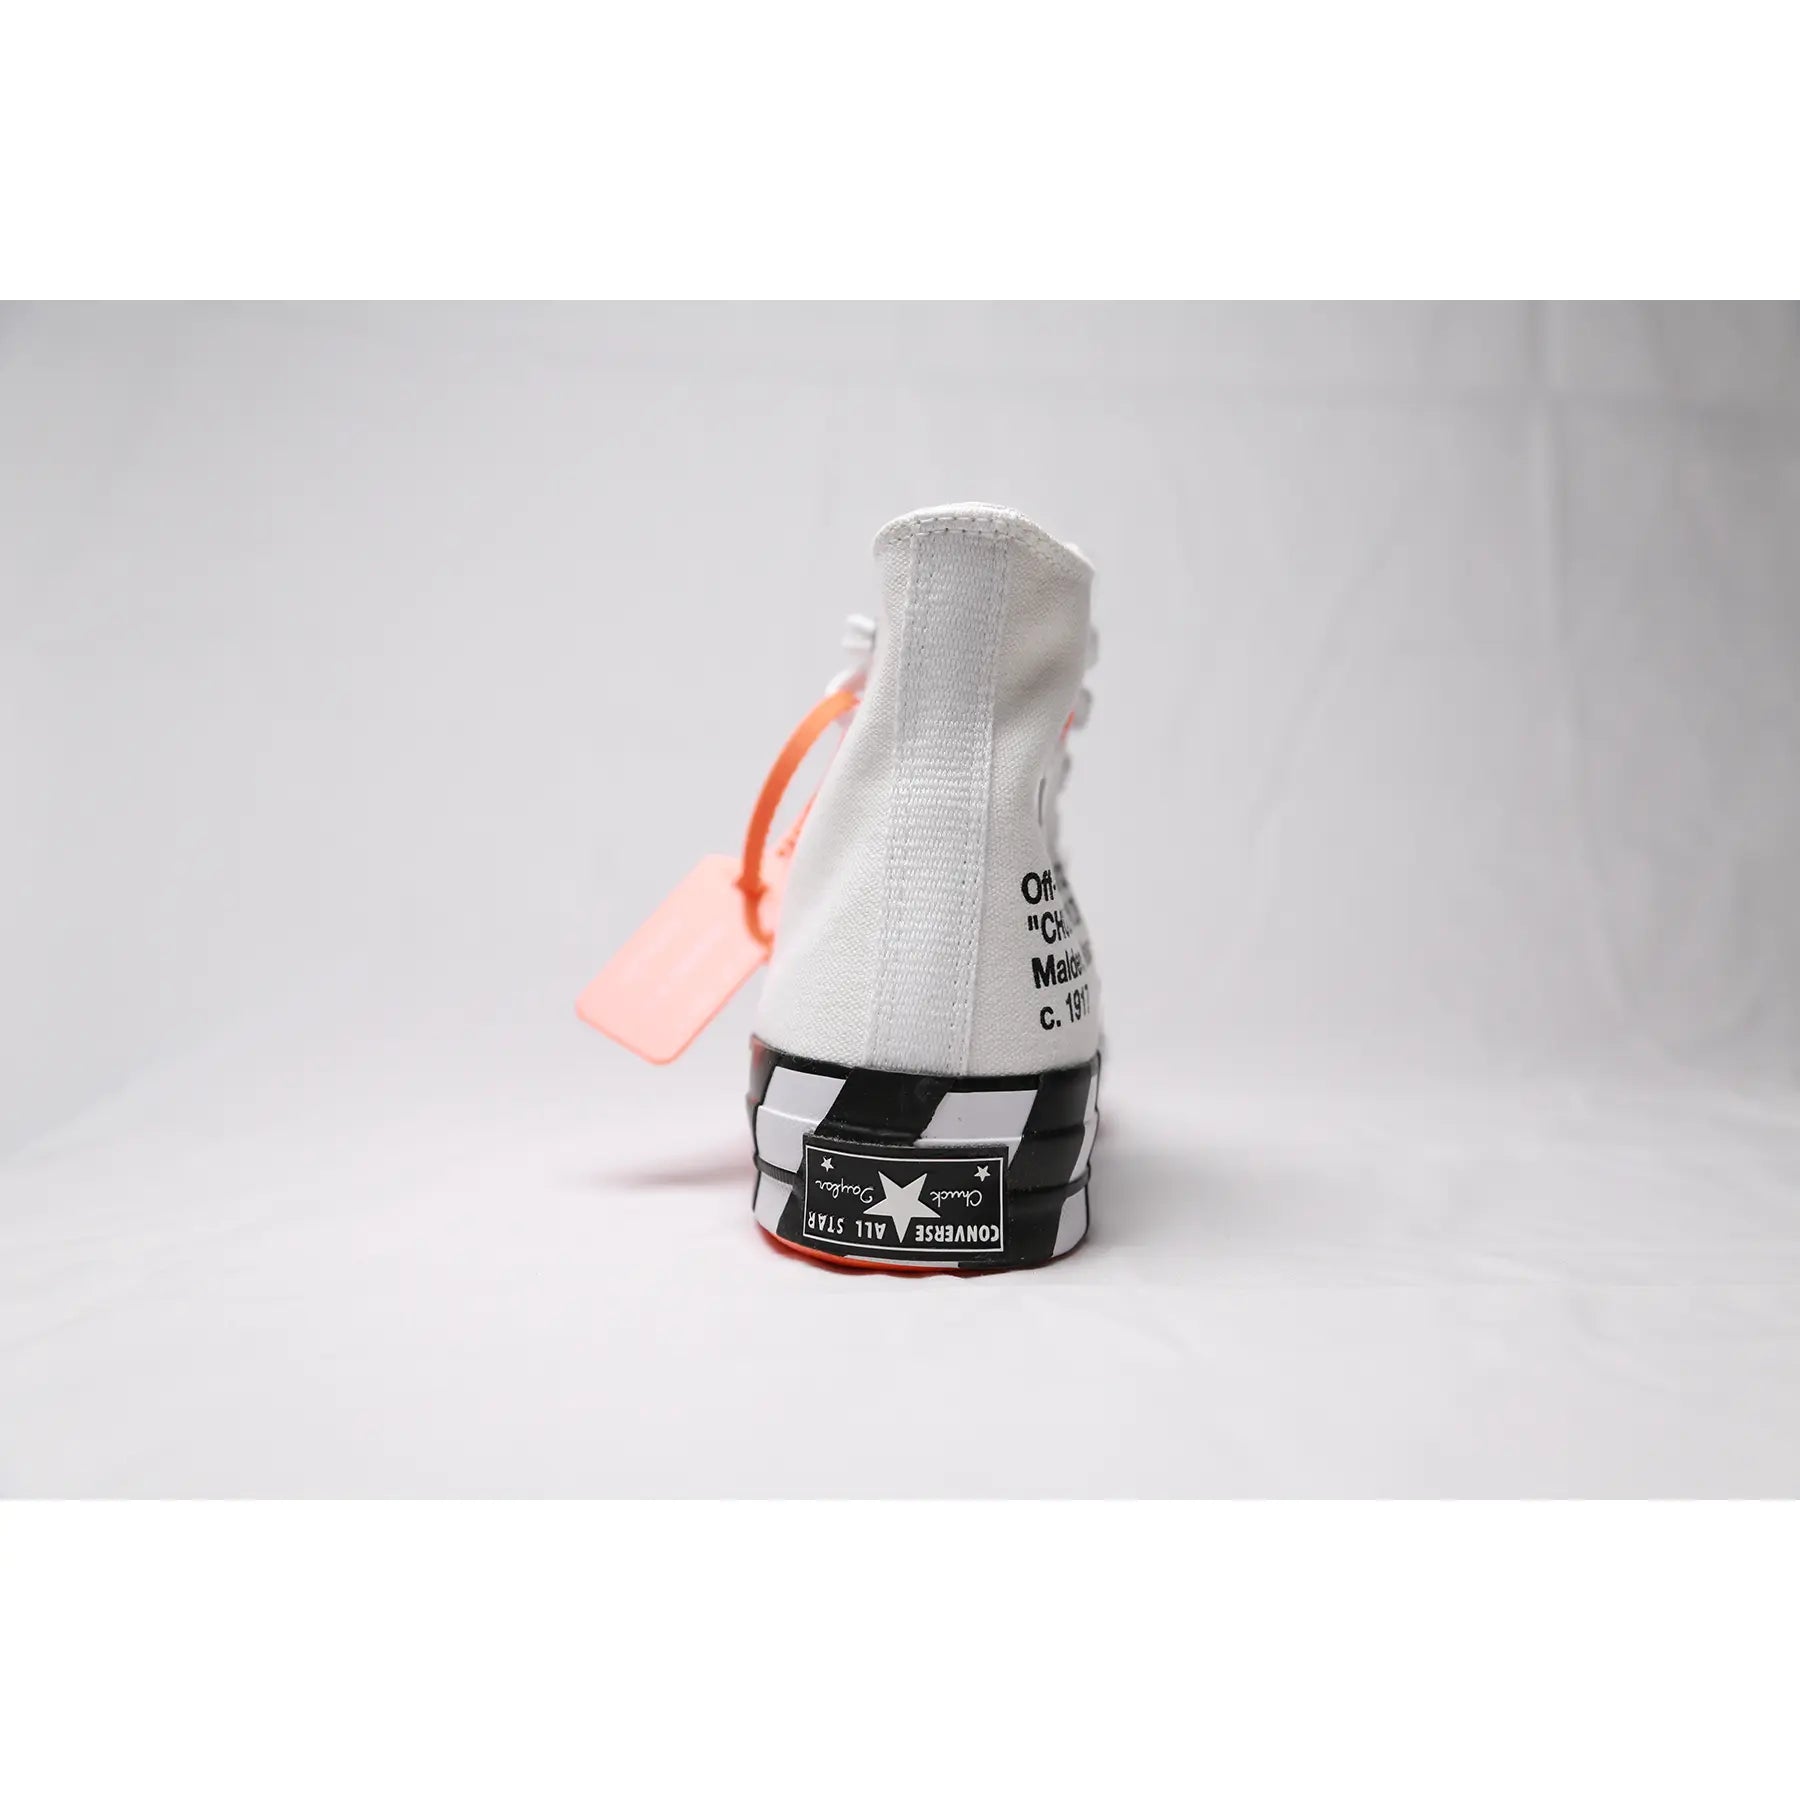 Converse Off-White Chuck Taylor All-Star 70s